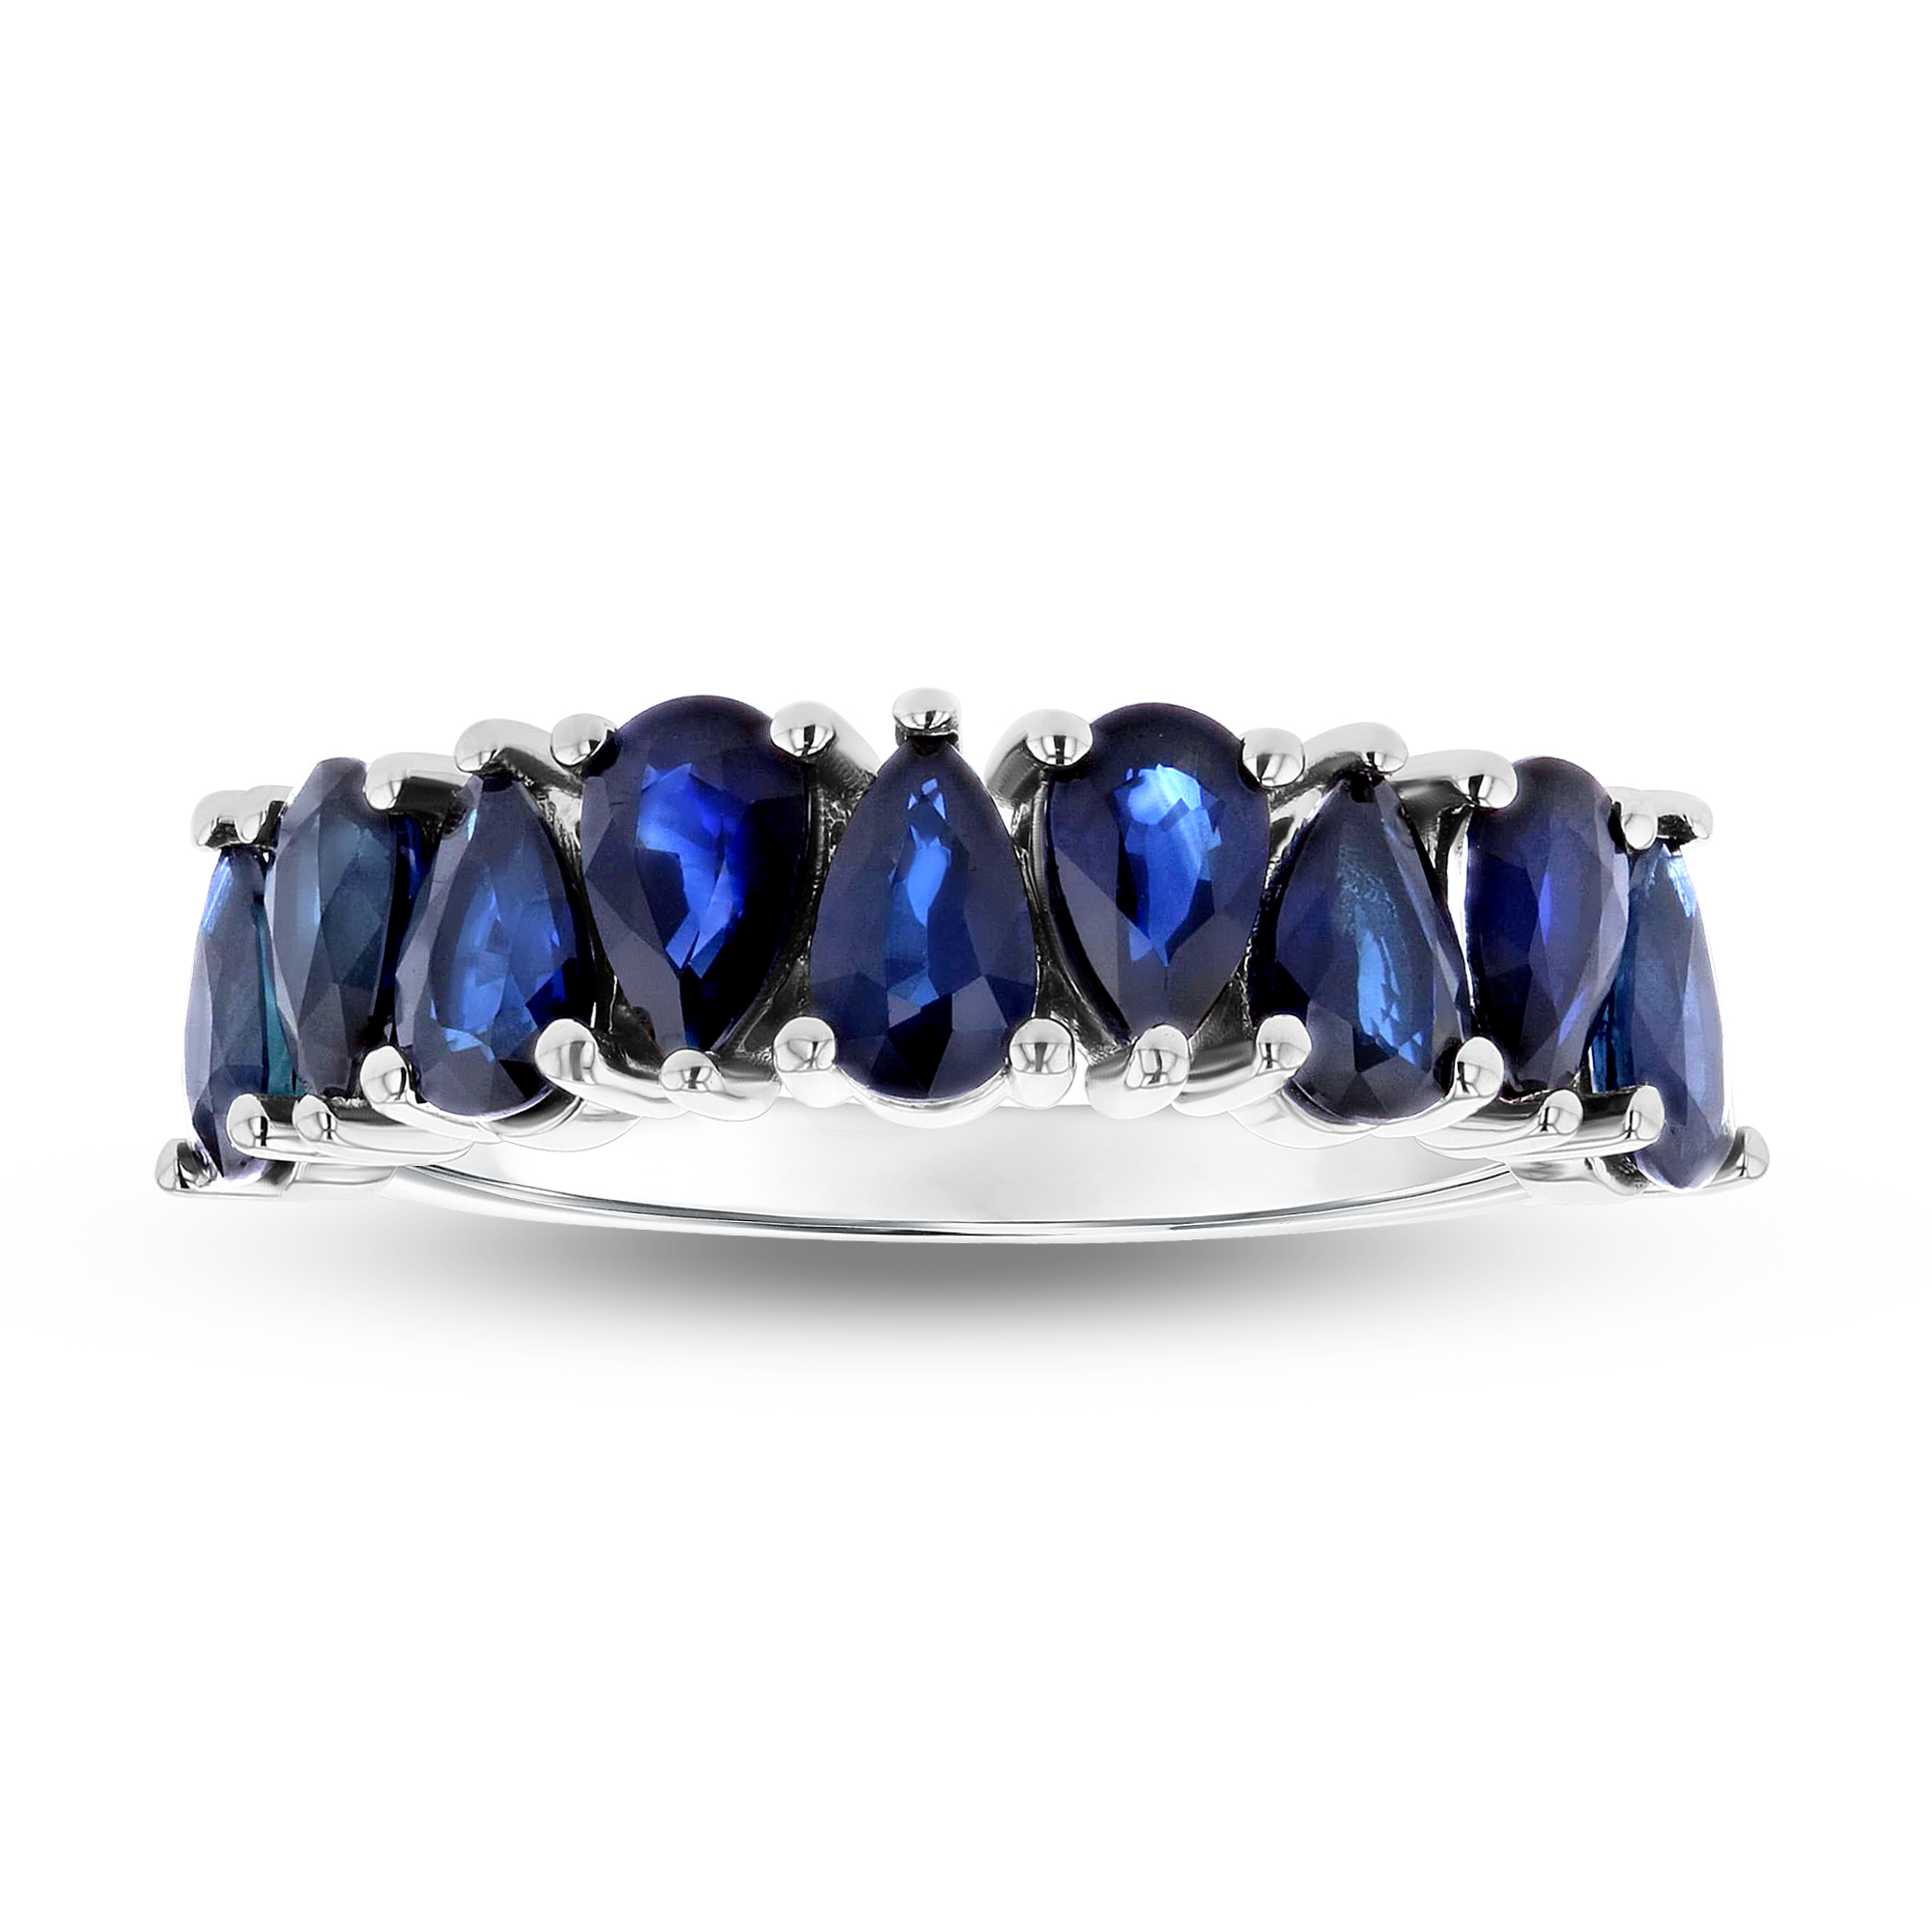 View 2.05ctw Pear Shaped Sapphire band in 14k White Gold